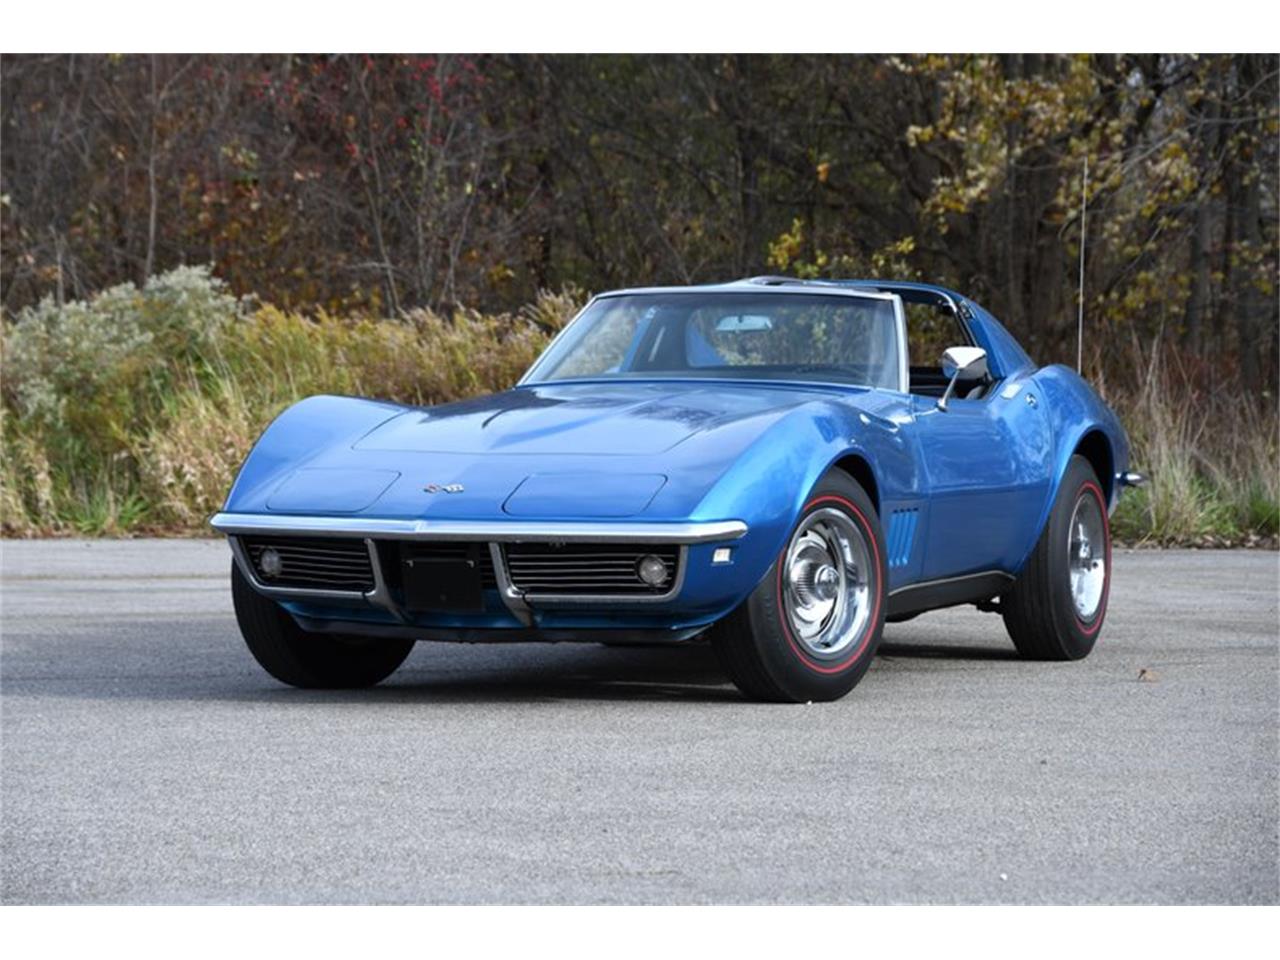 For Sale: 1968 Chevrolet Corvette in Elyria, Ohio for sale in Elyria, OH